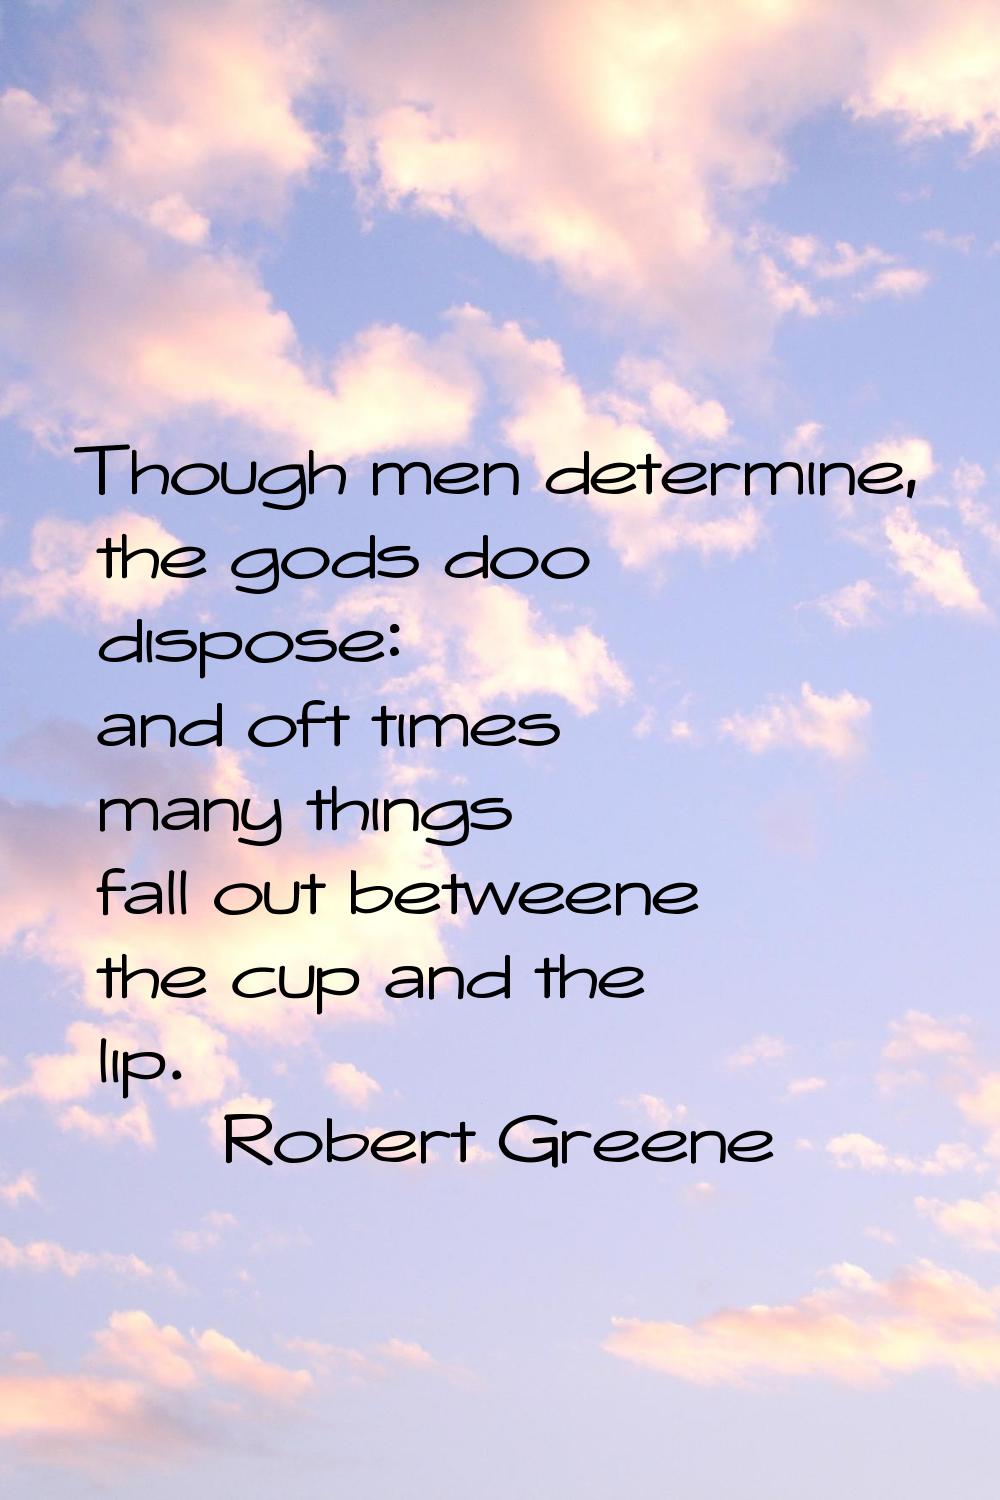 Though men determine, the gods doo dispose: and oft times many things fall out betweene the cup and